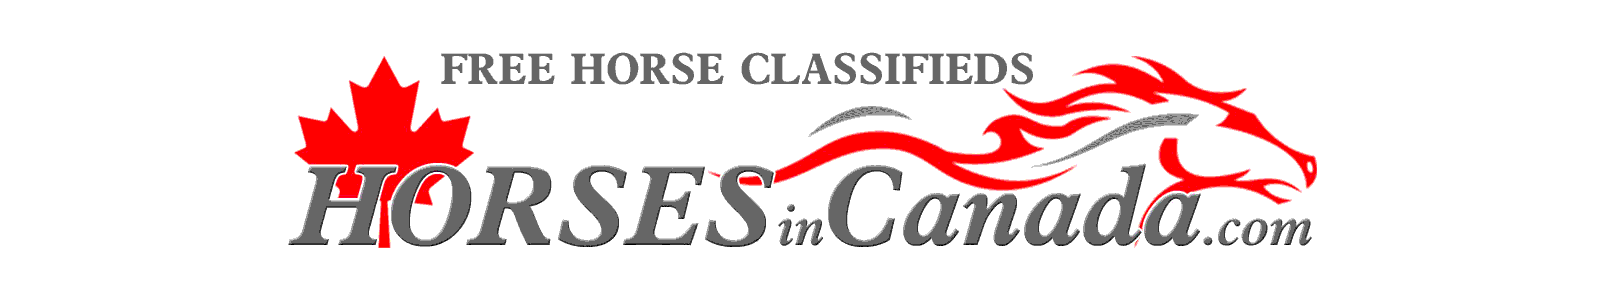 Horses in Canada, free classified ads and advertising opportunities